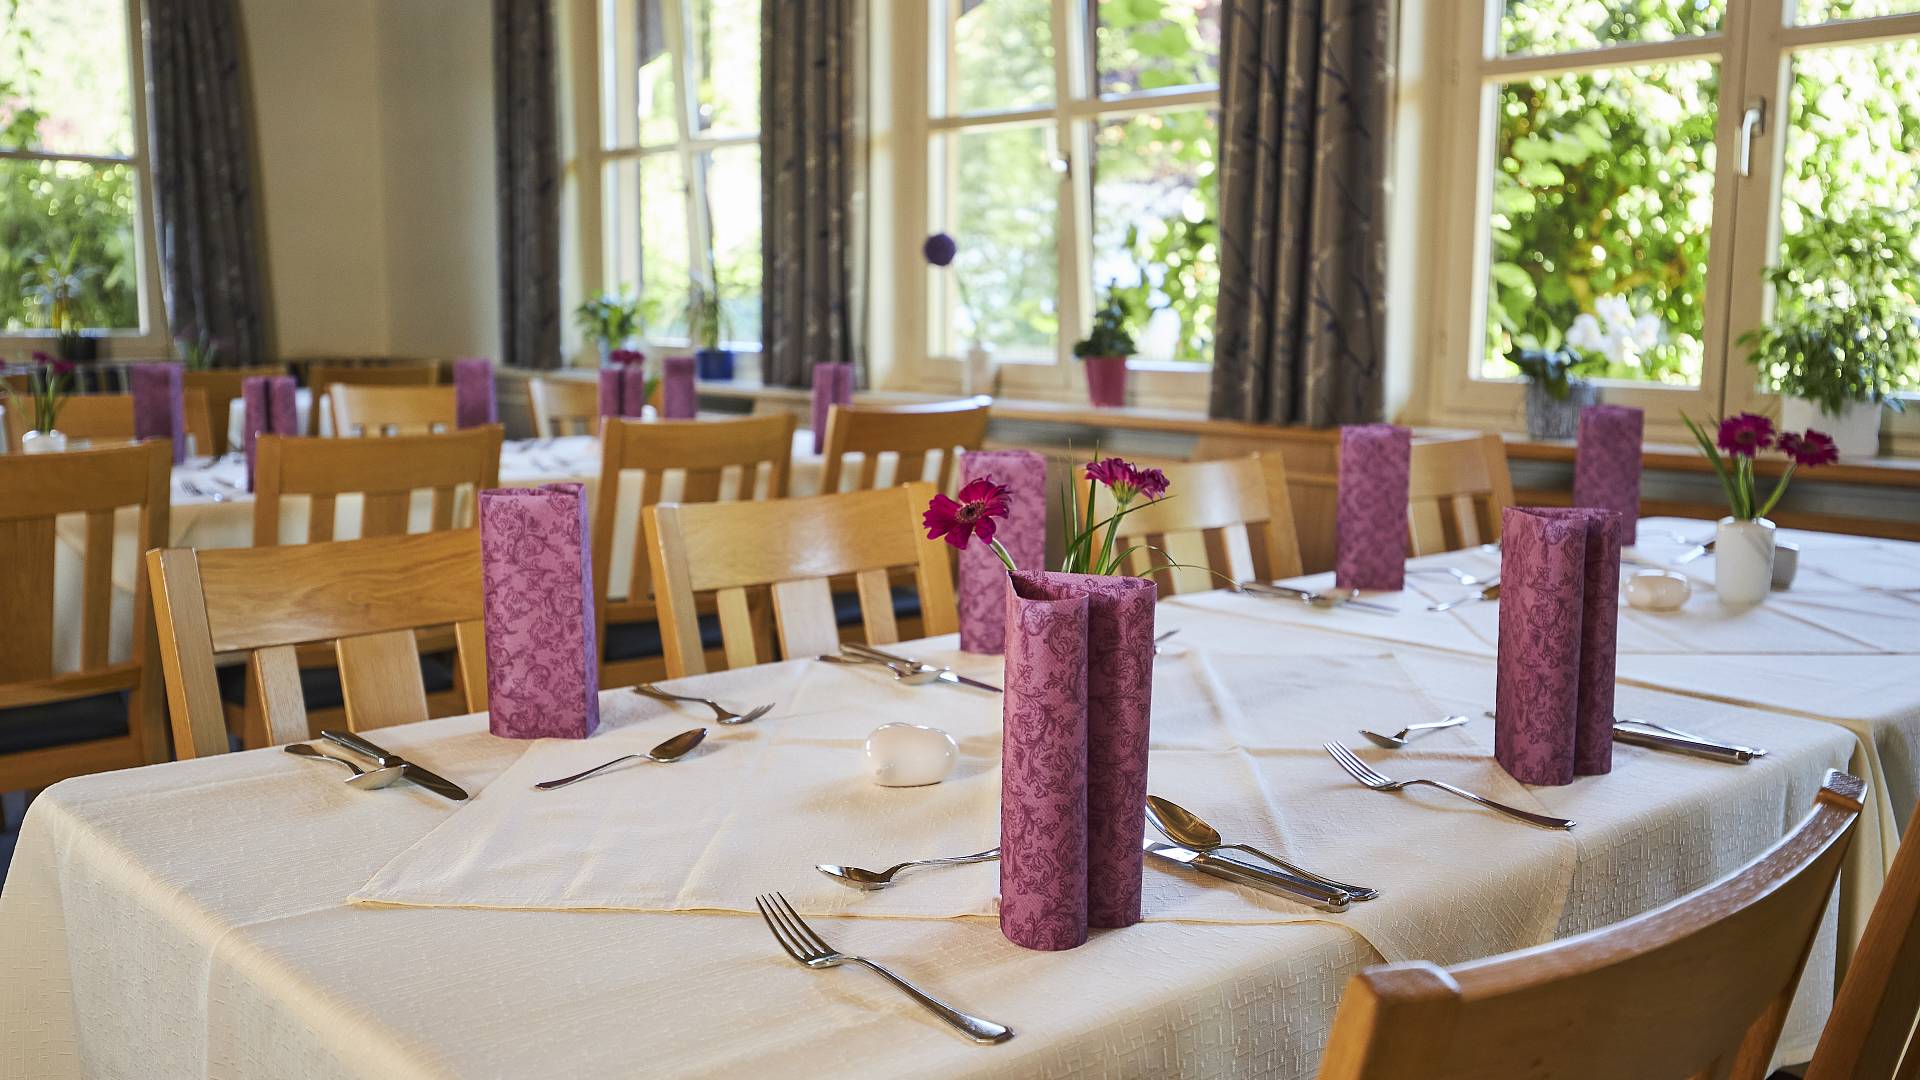 Decoratively set table with purple napkins and flowers